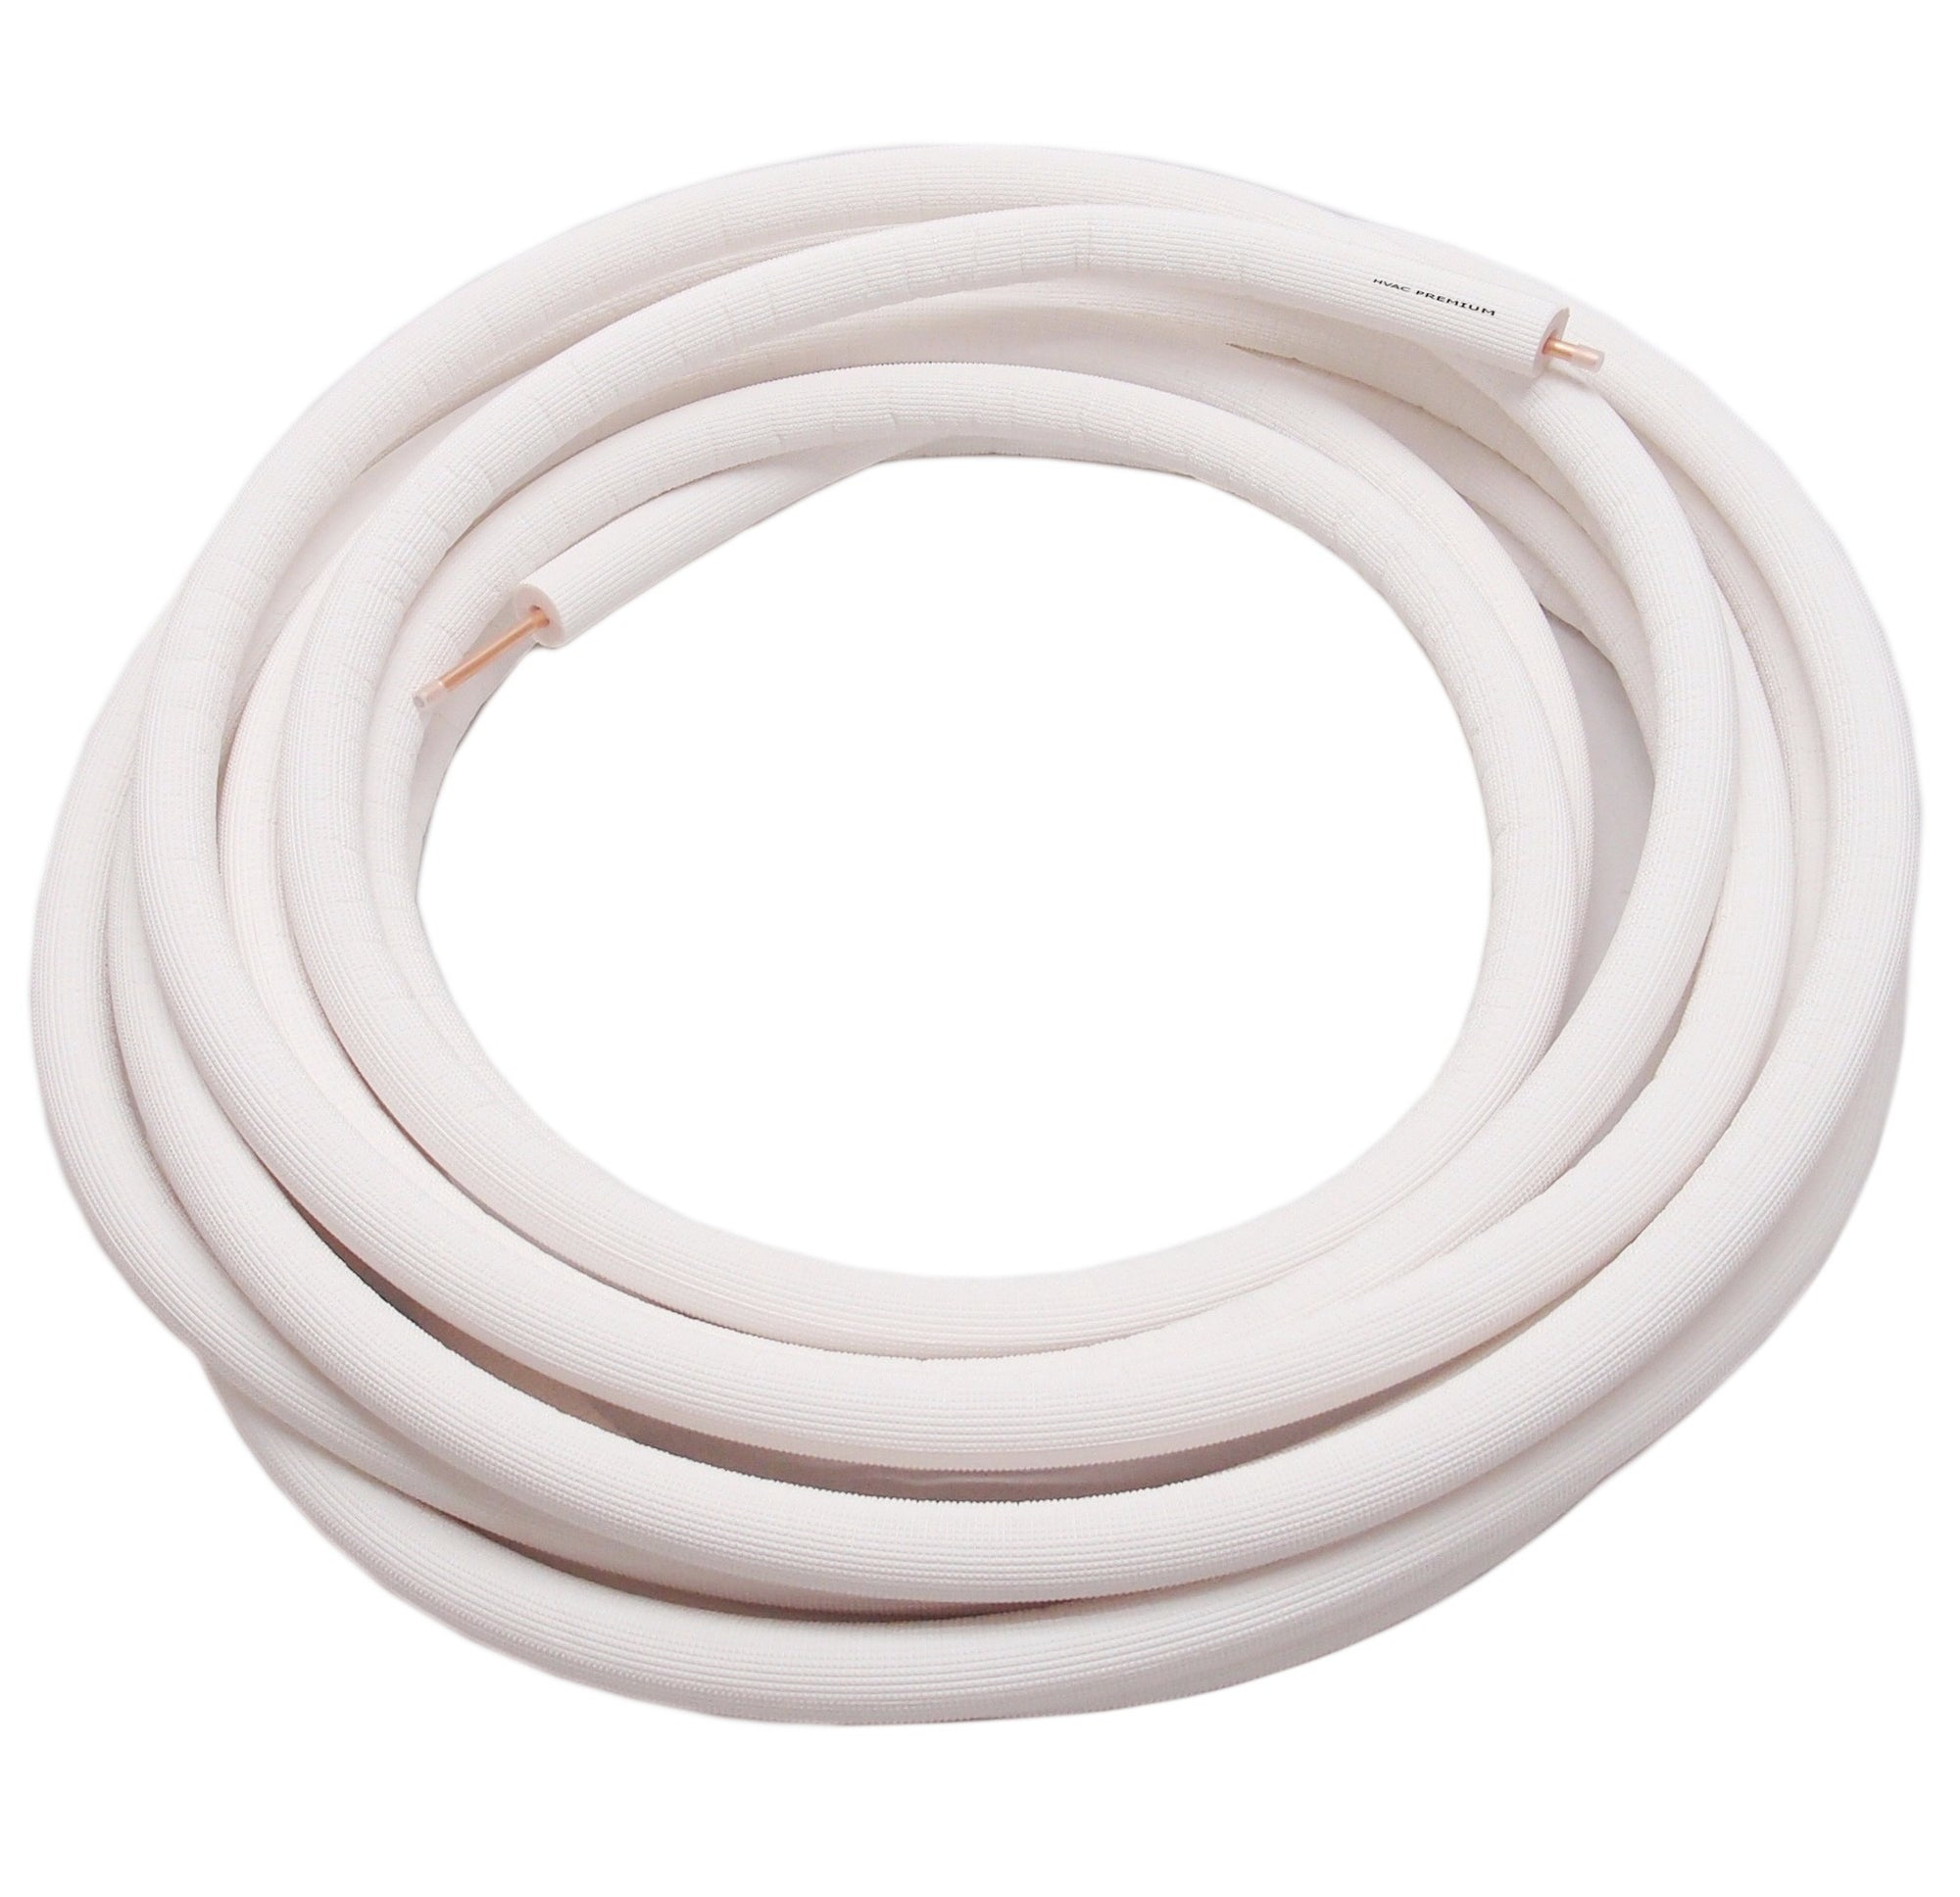 1/2" Insulated Copper Coil Line - Seamless Pipe Tube for HVAC, Refrigerant - 1/2" White Insulation - 50' Long